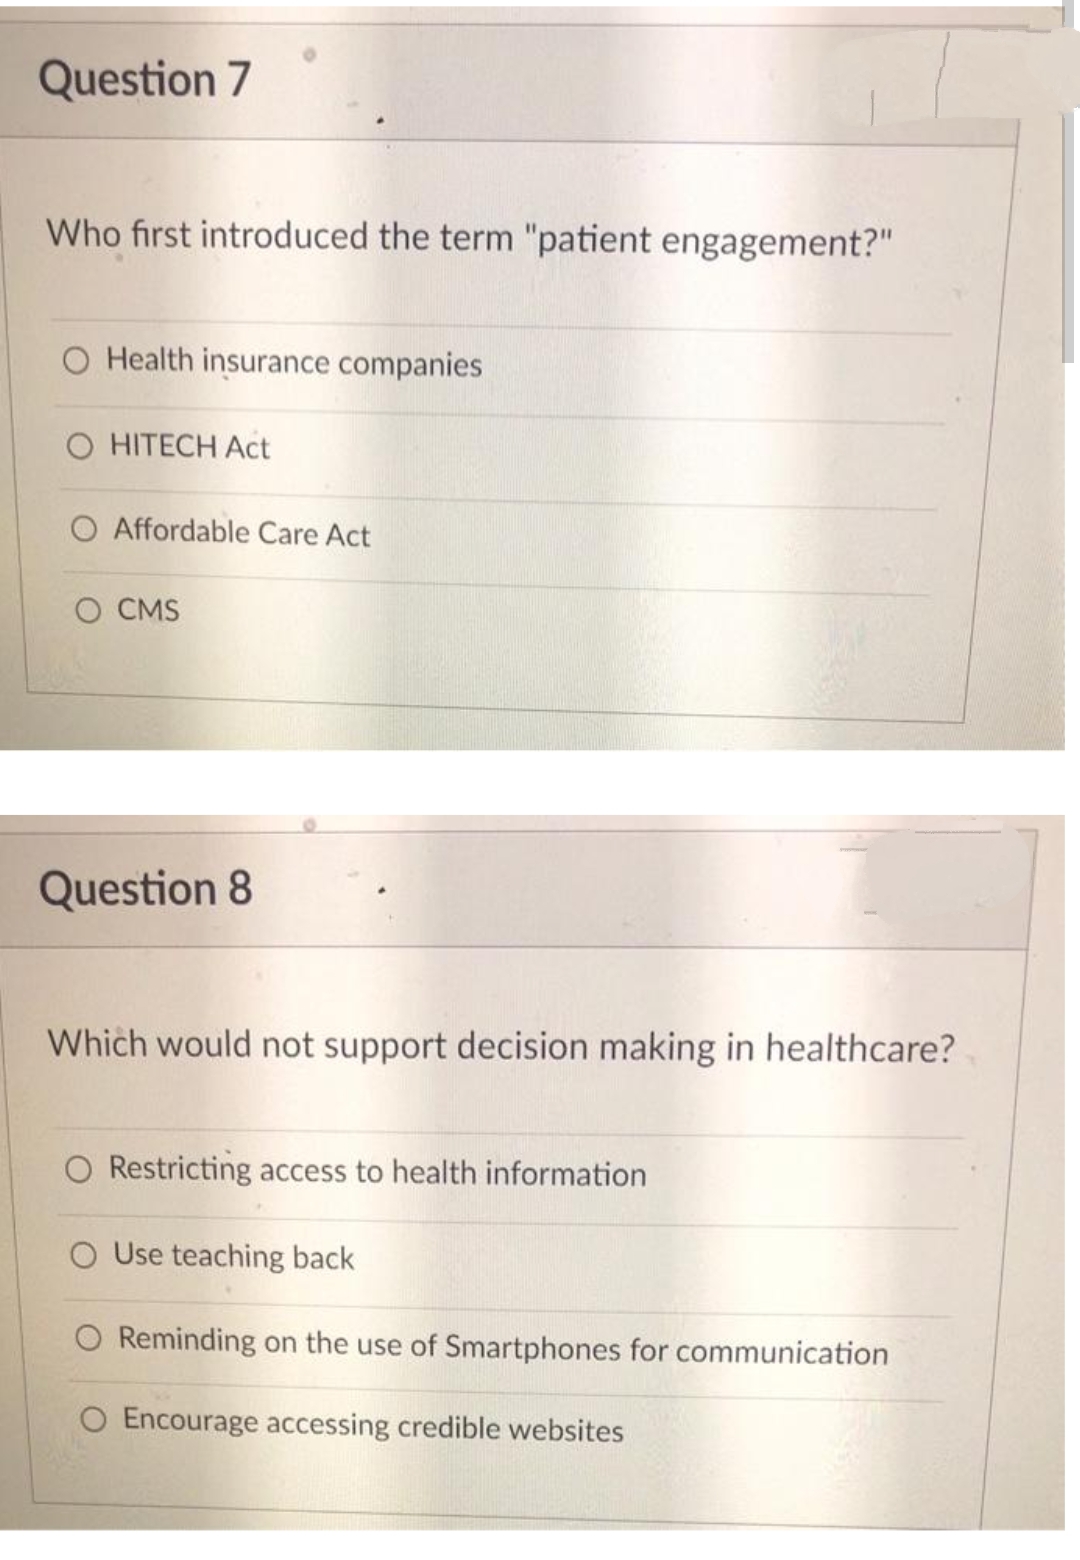 Question 7
Who first introduced the term "patient engagement?"
O Health insurance companies
O HITECH Act
O Affordable Care Act
O CMS
Question 8
Which would not support decision making in healthcare?
O Restricting access to health information
O Use teaching back
O Reminding on the use of Smartphones for communication
O Encourage accessing credible websites
